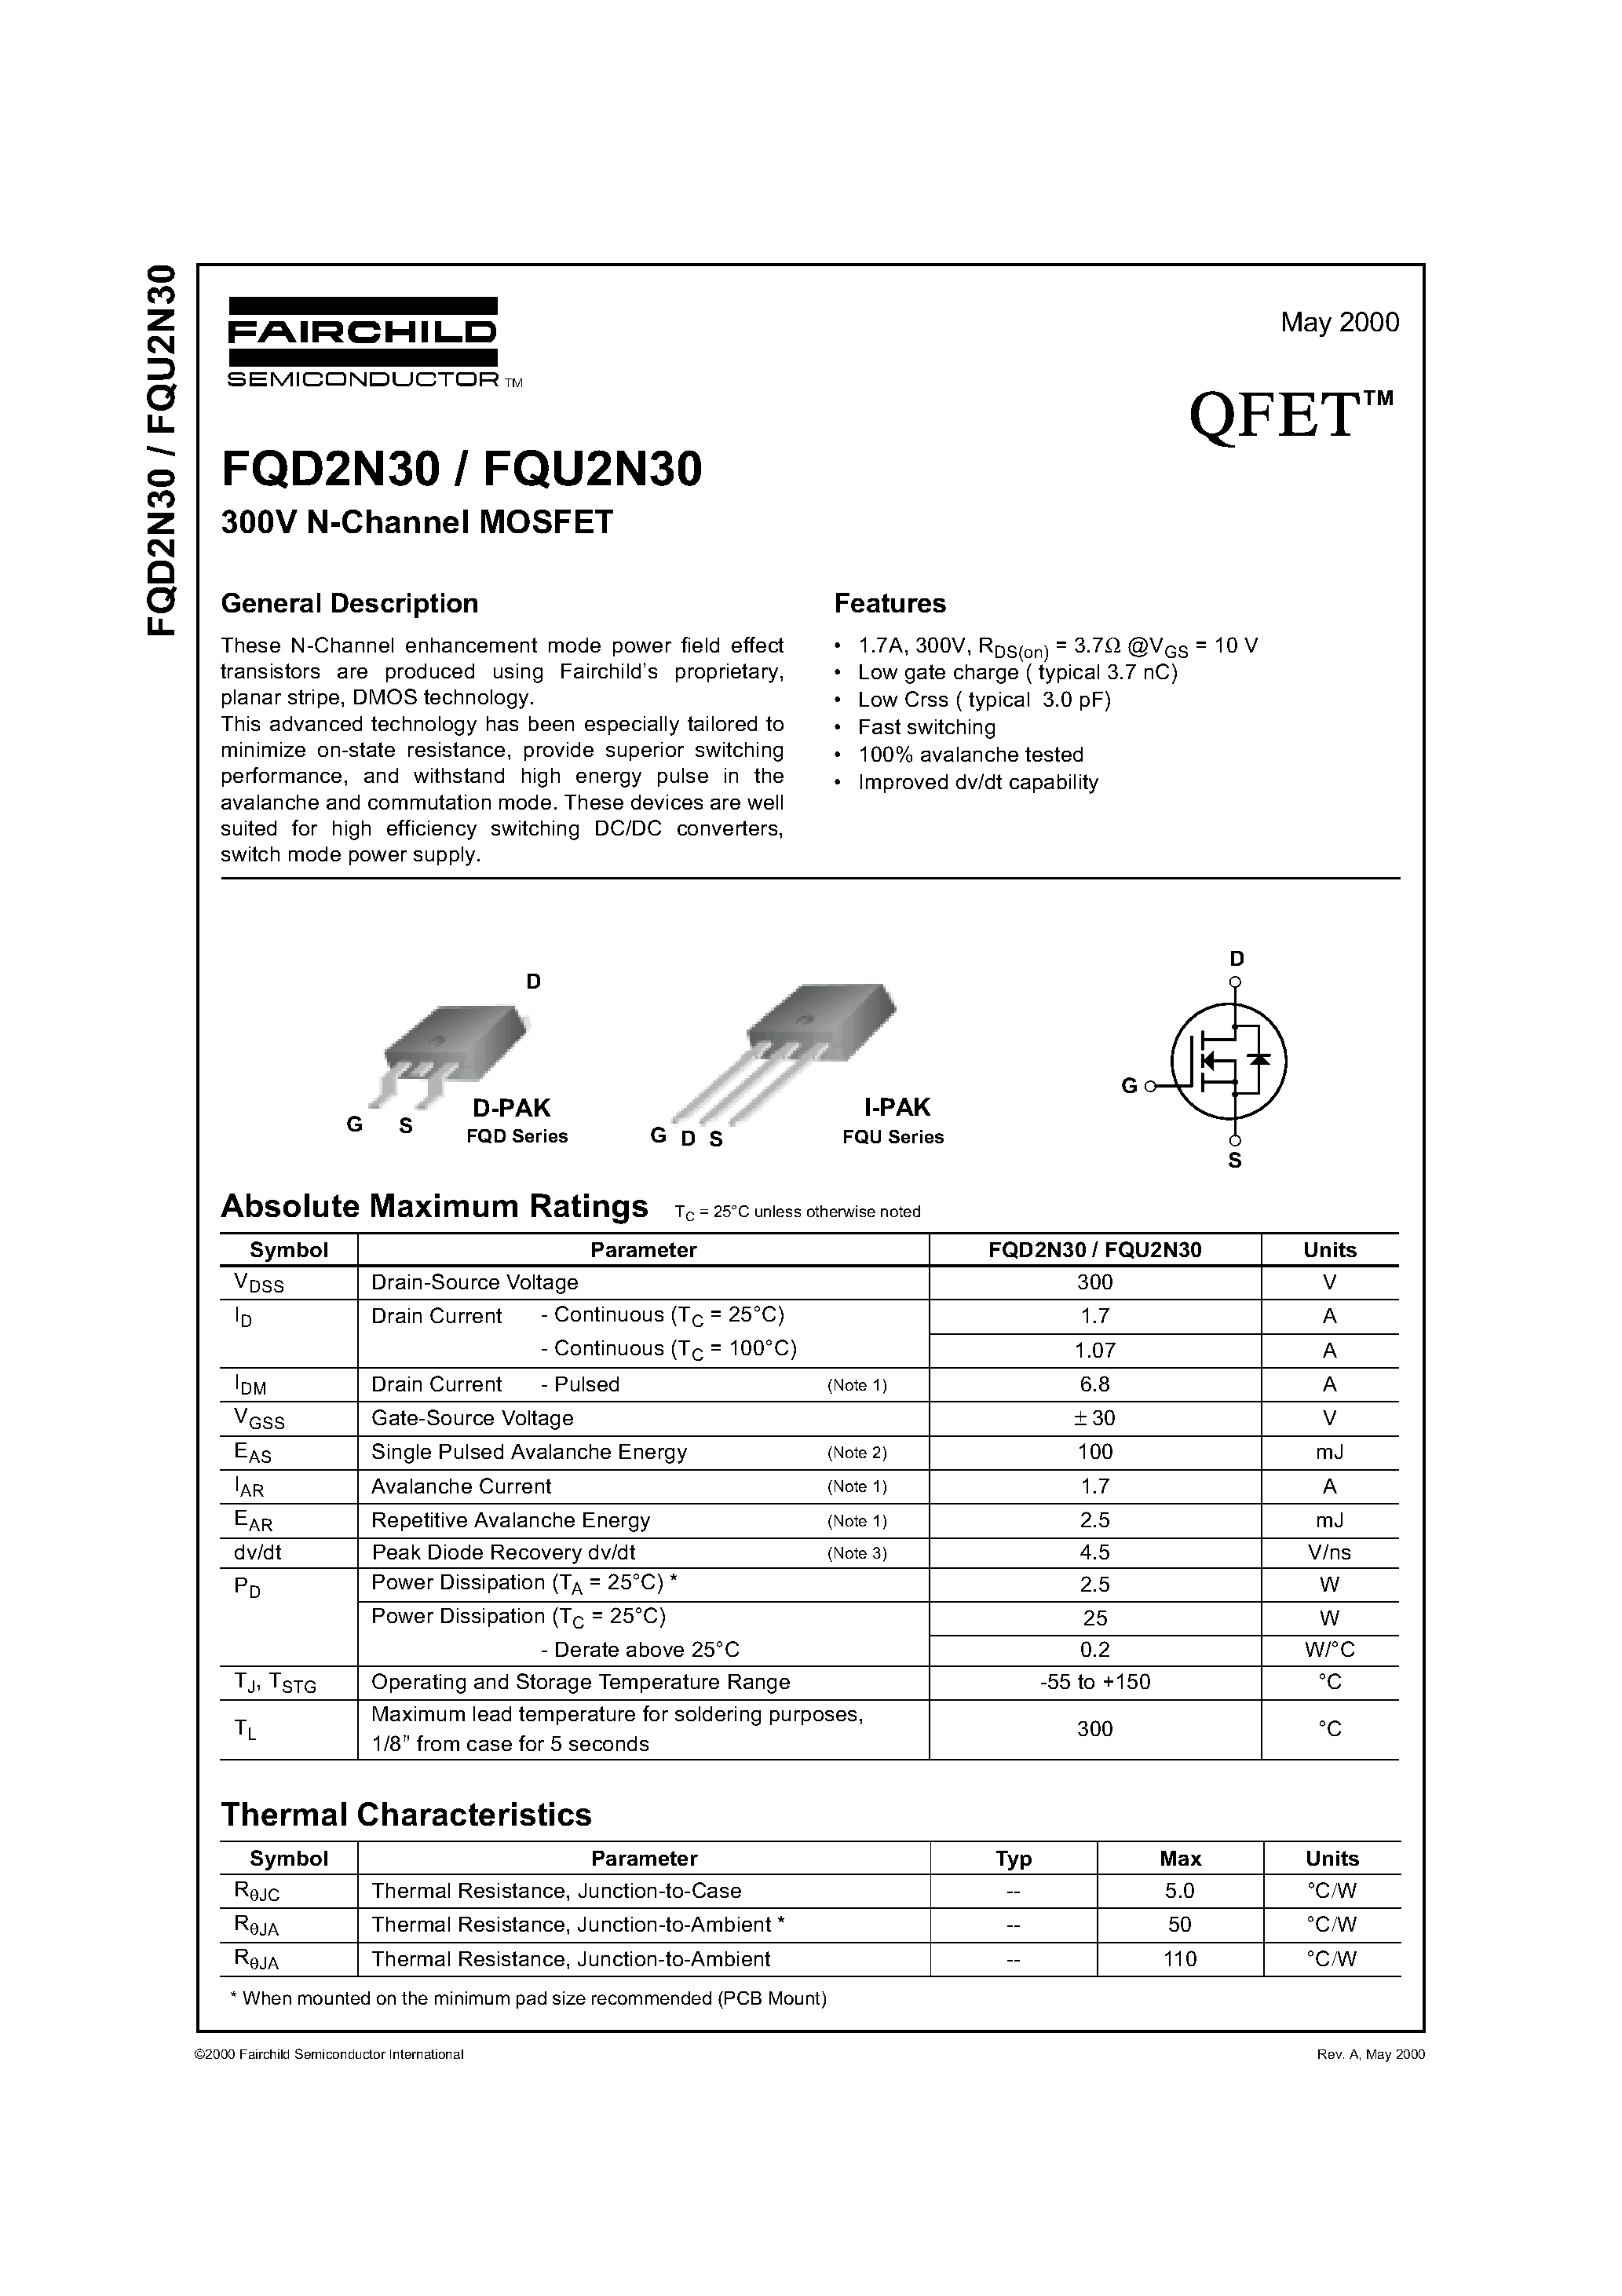 Datasheet FQD2N30 - 300V N-Channel MOSFET page 1